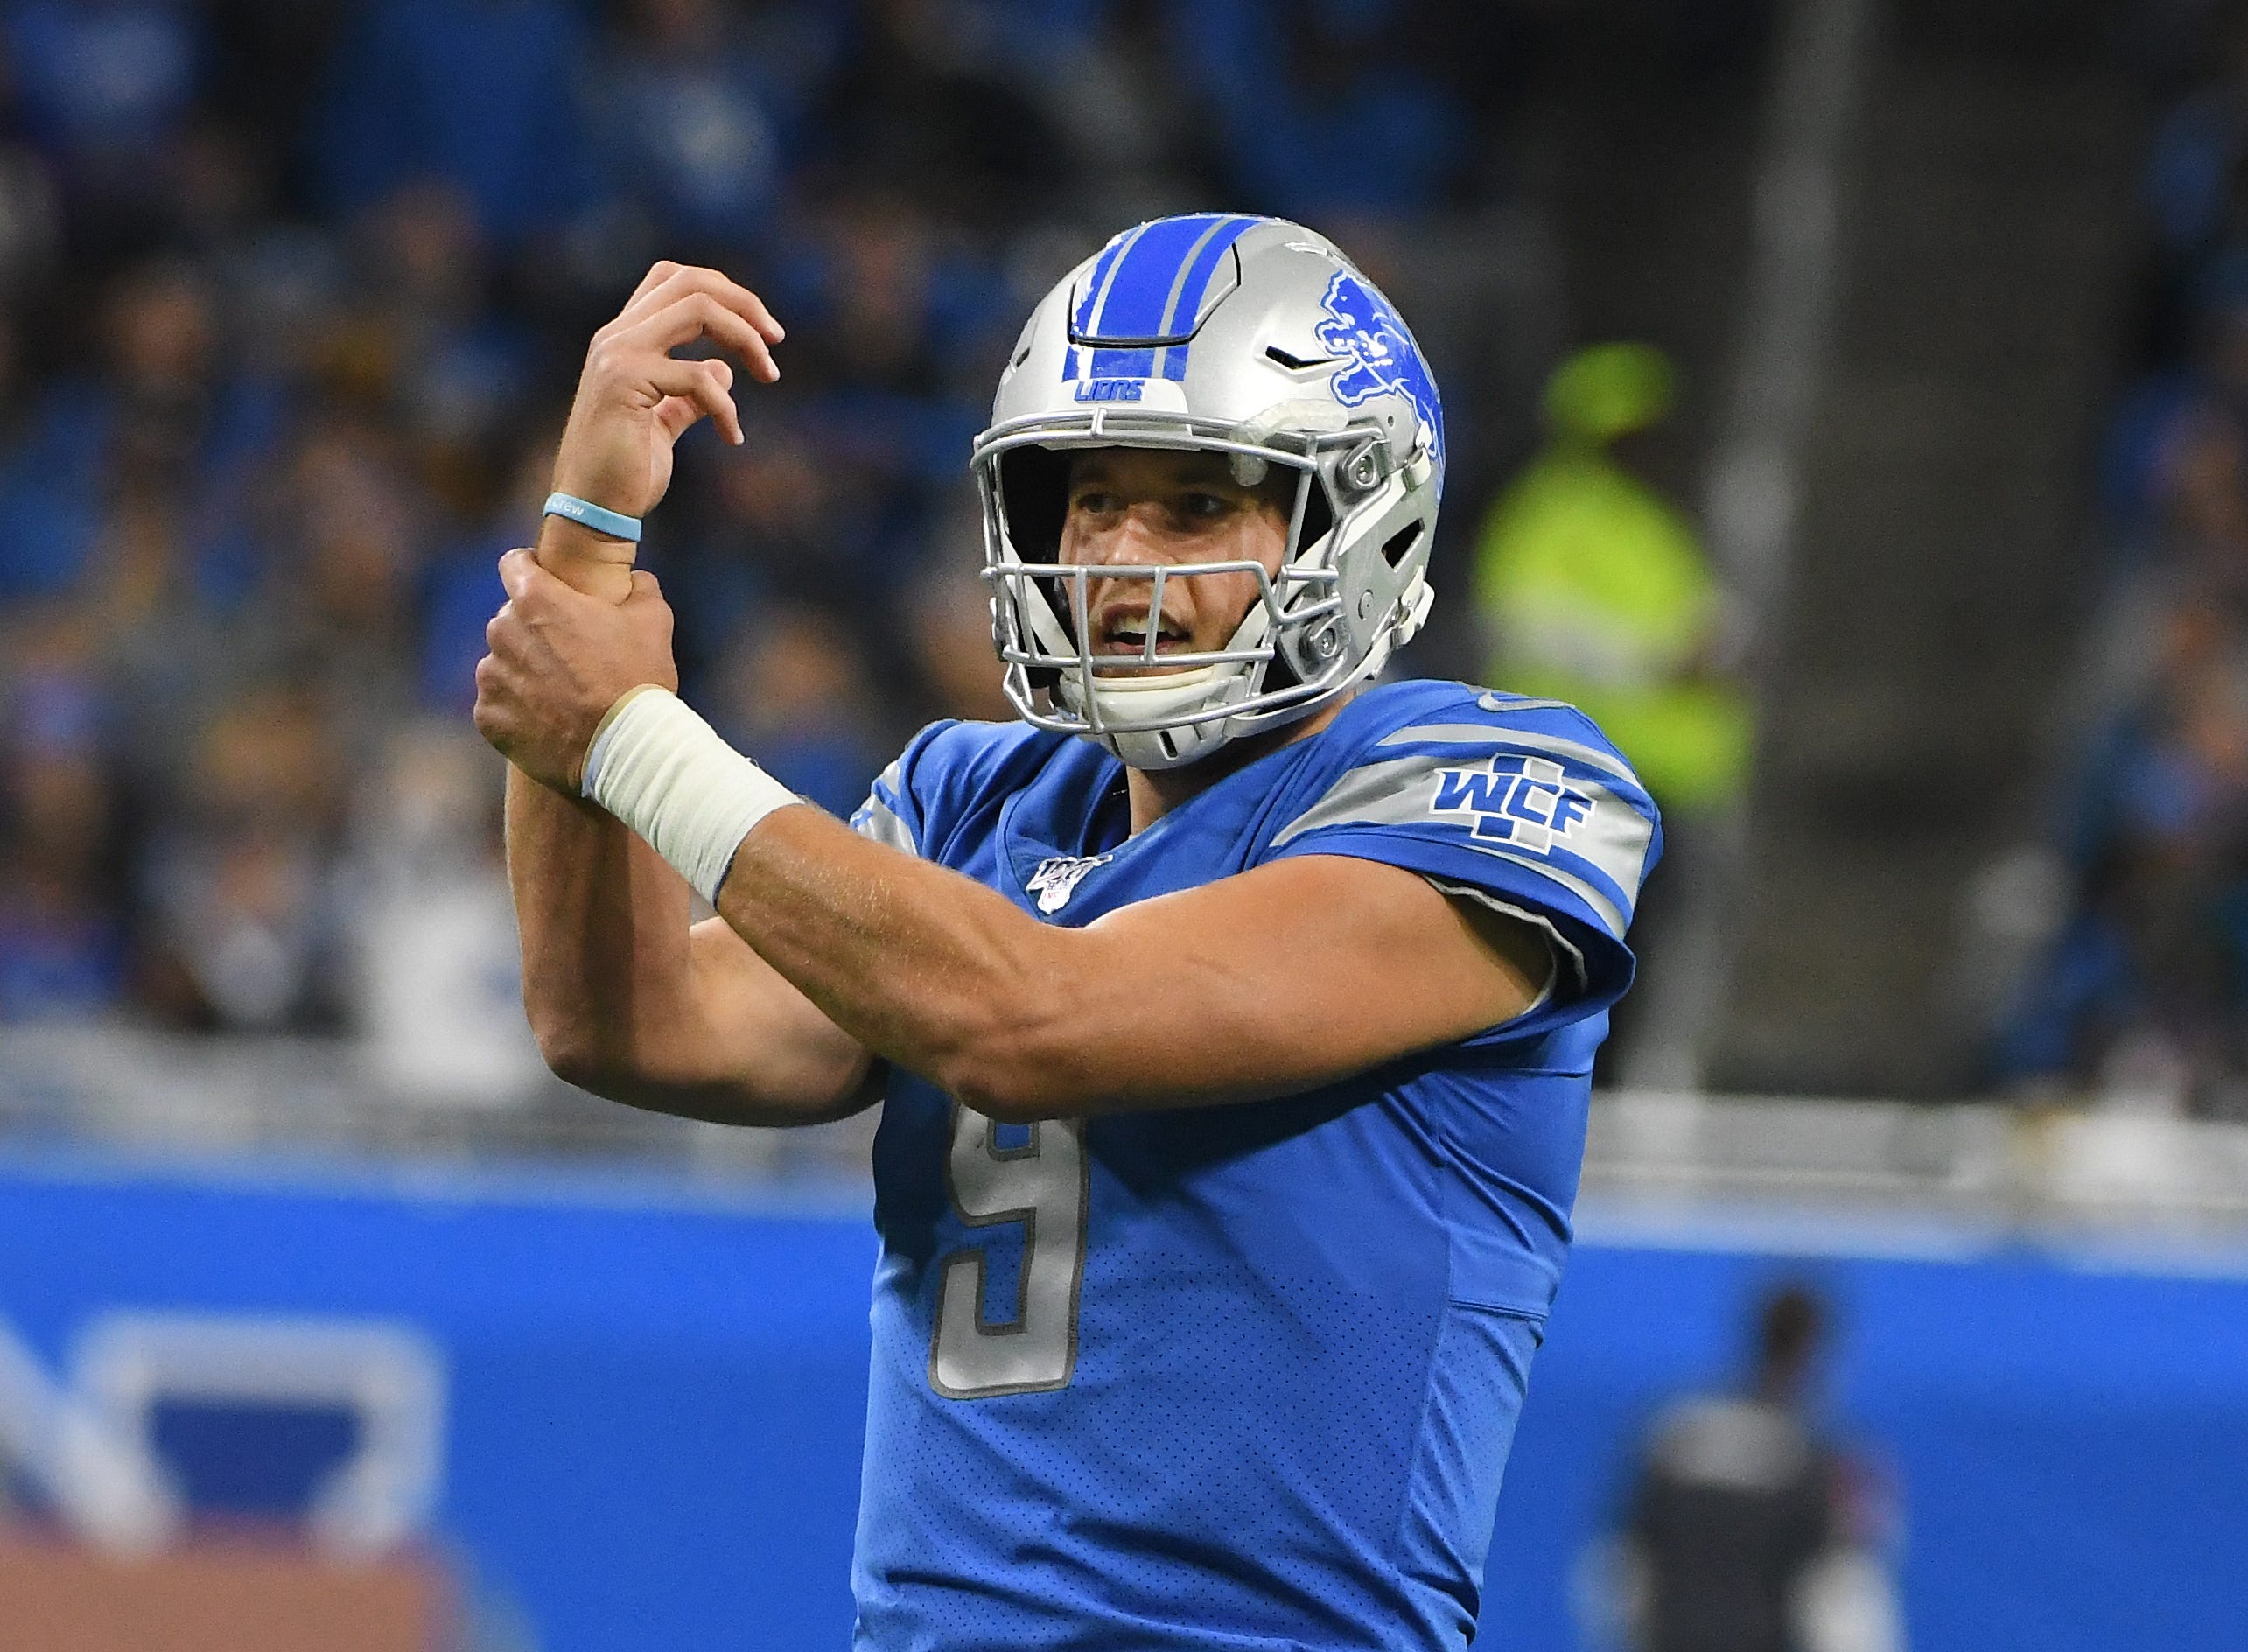 Lions quarterback Matthew Stafford gestures to officials on the field after not agreeing with a call in the second quarter.